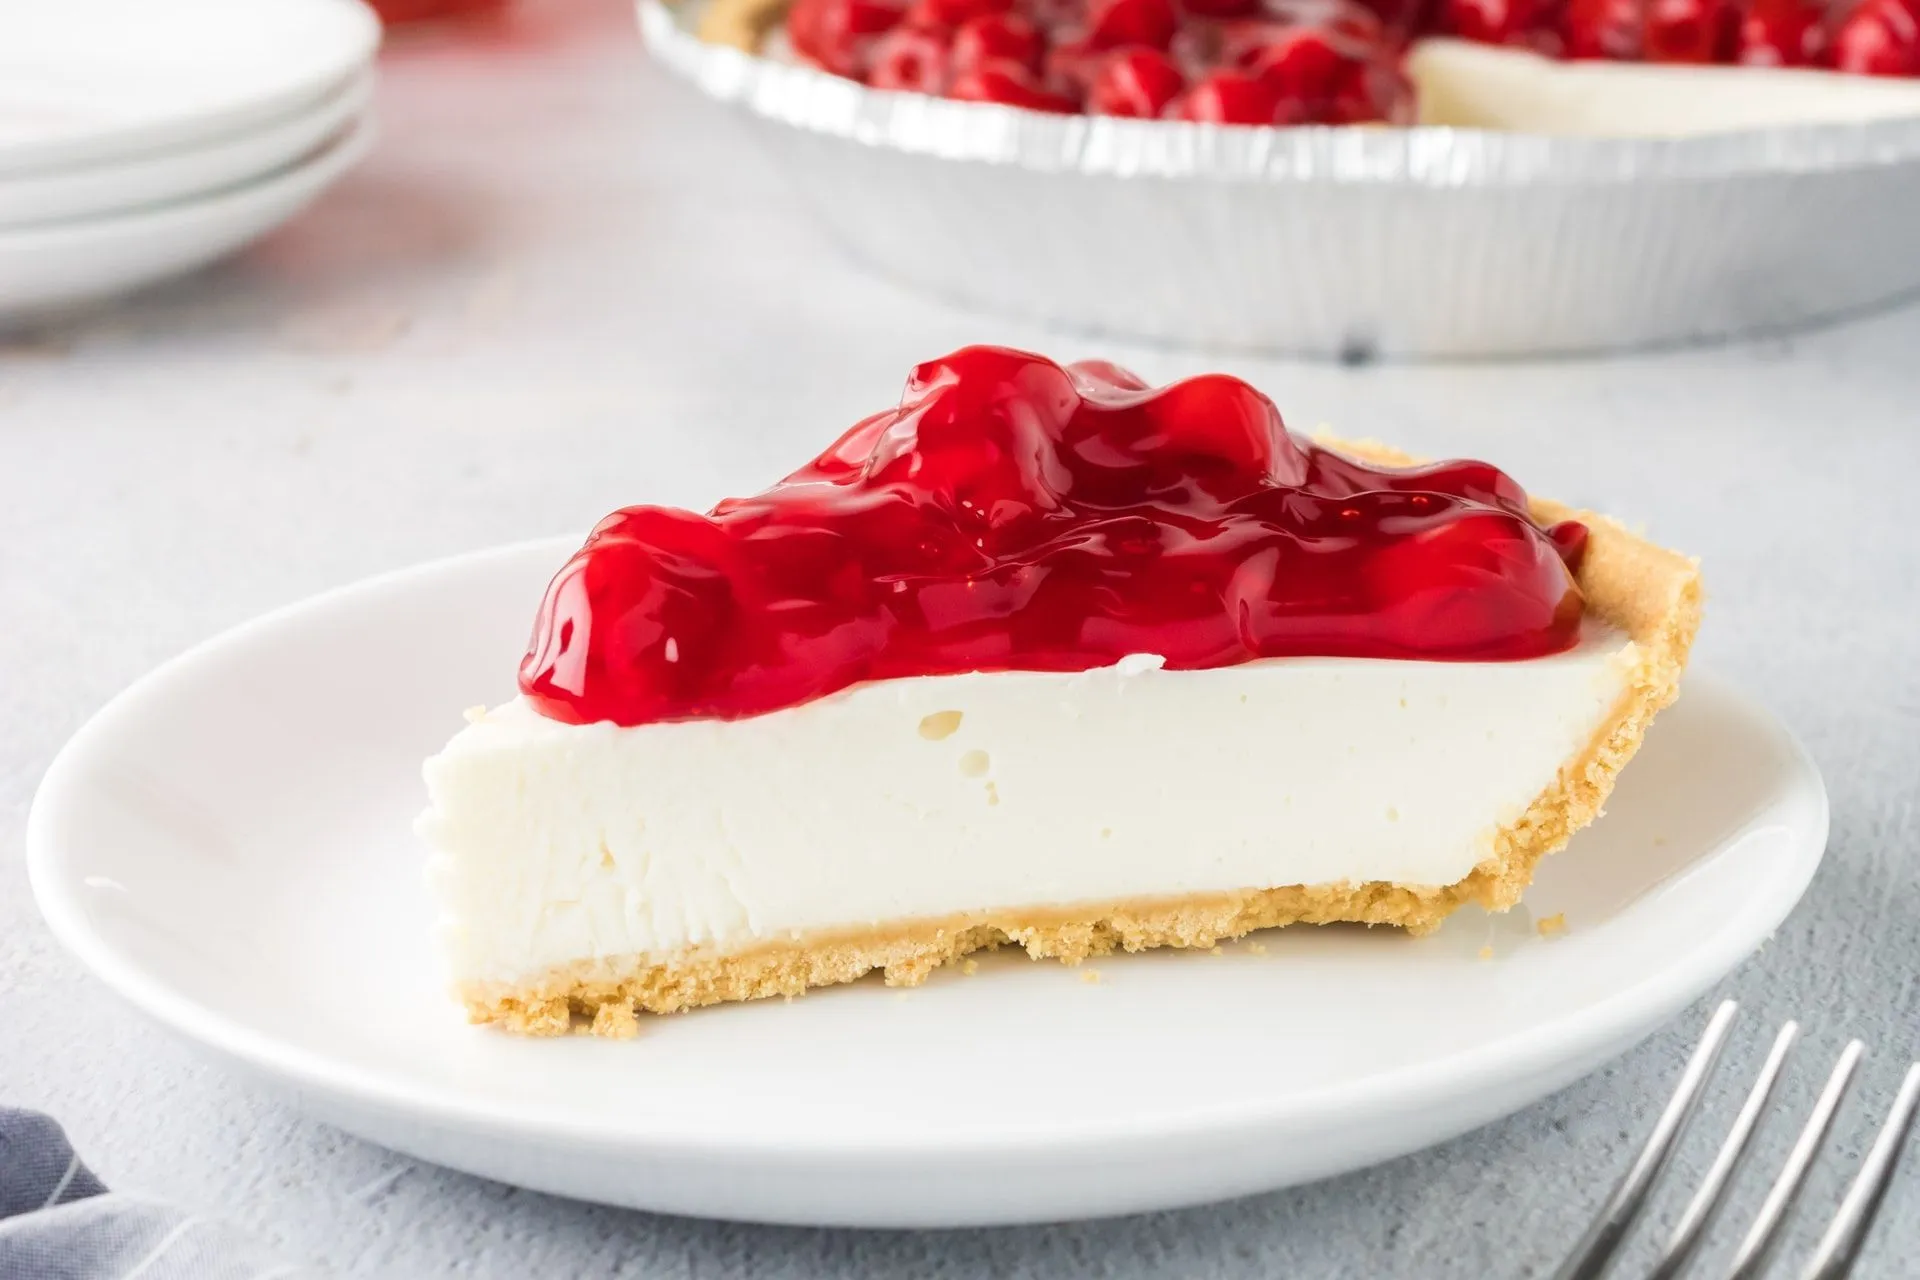 The Baking Science: How Do You Know When Cheesecake Is Done?